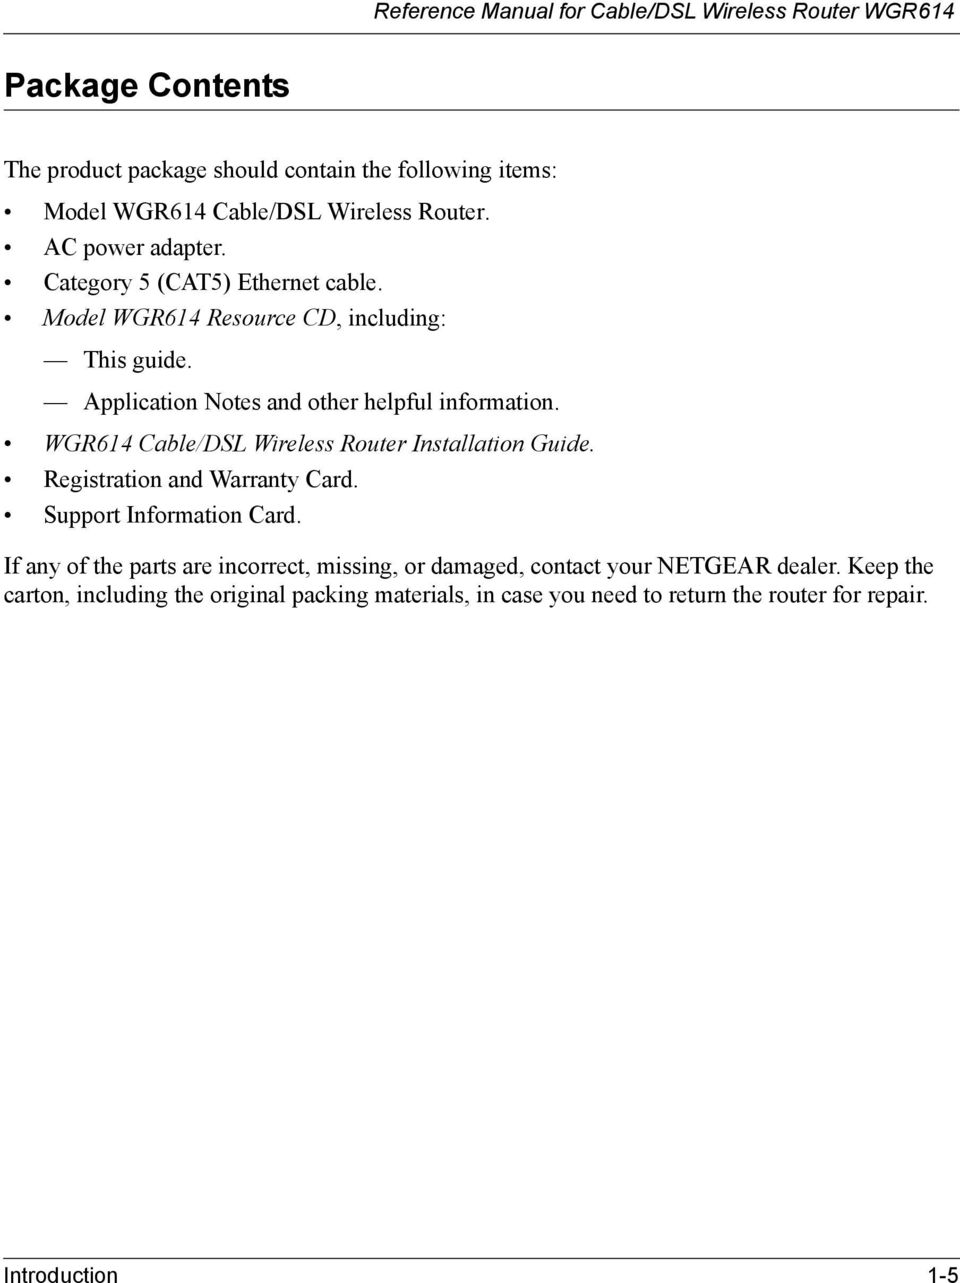 WGR614 Cable/DSL Wireless Router Installation Guide. Registration and Warranty Card. Support Information Card.